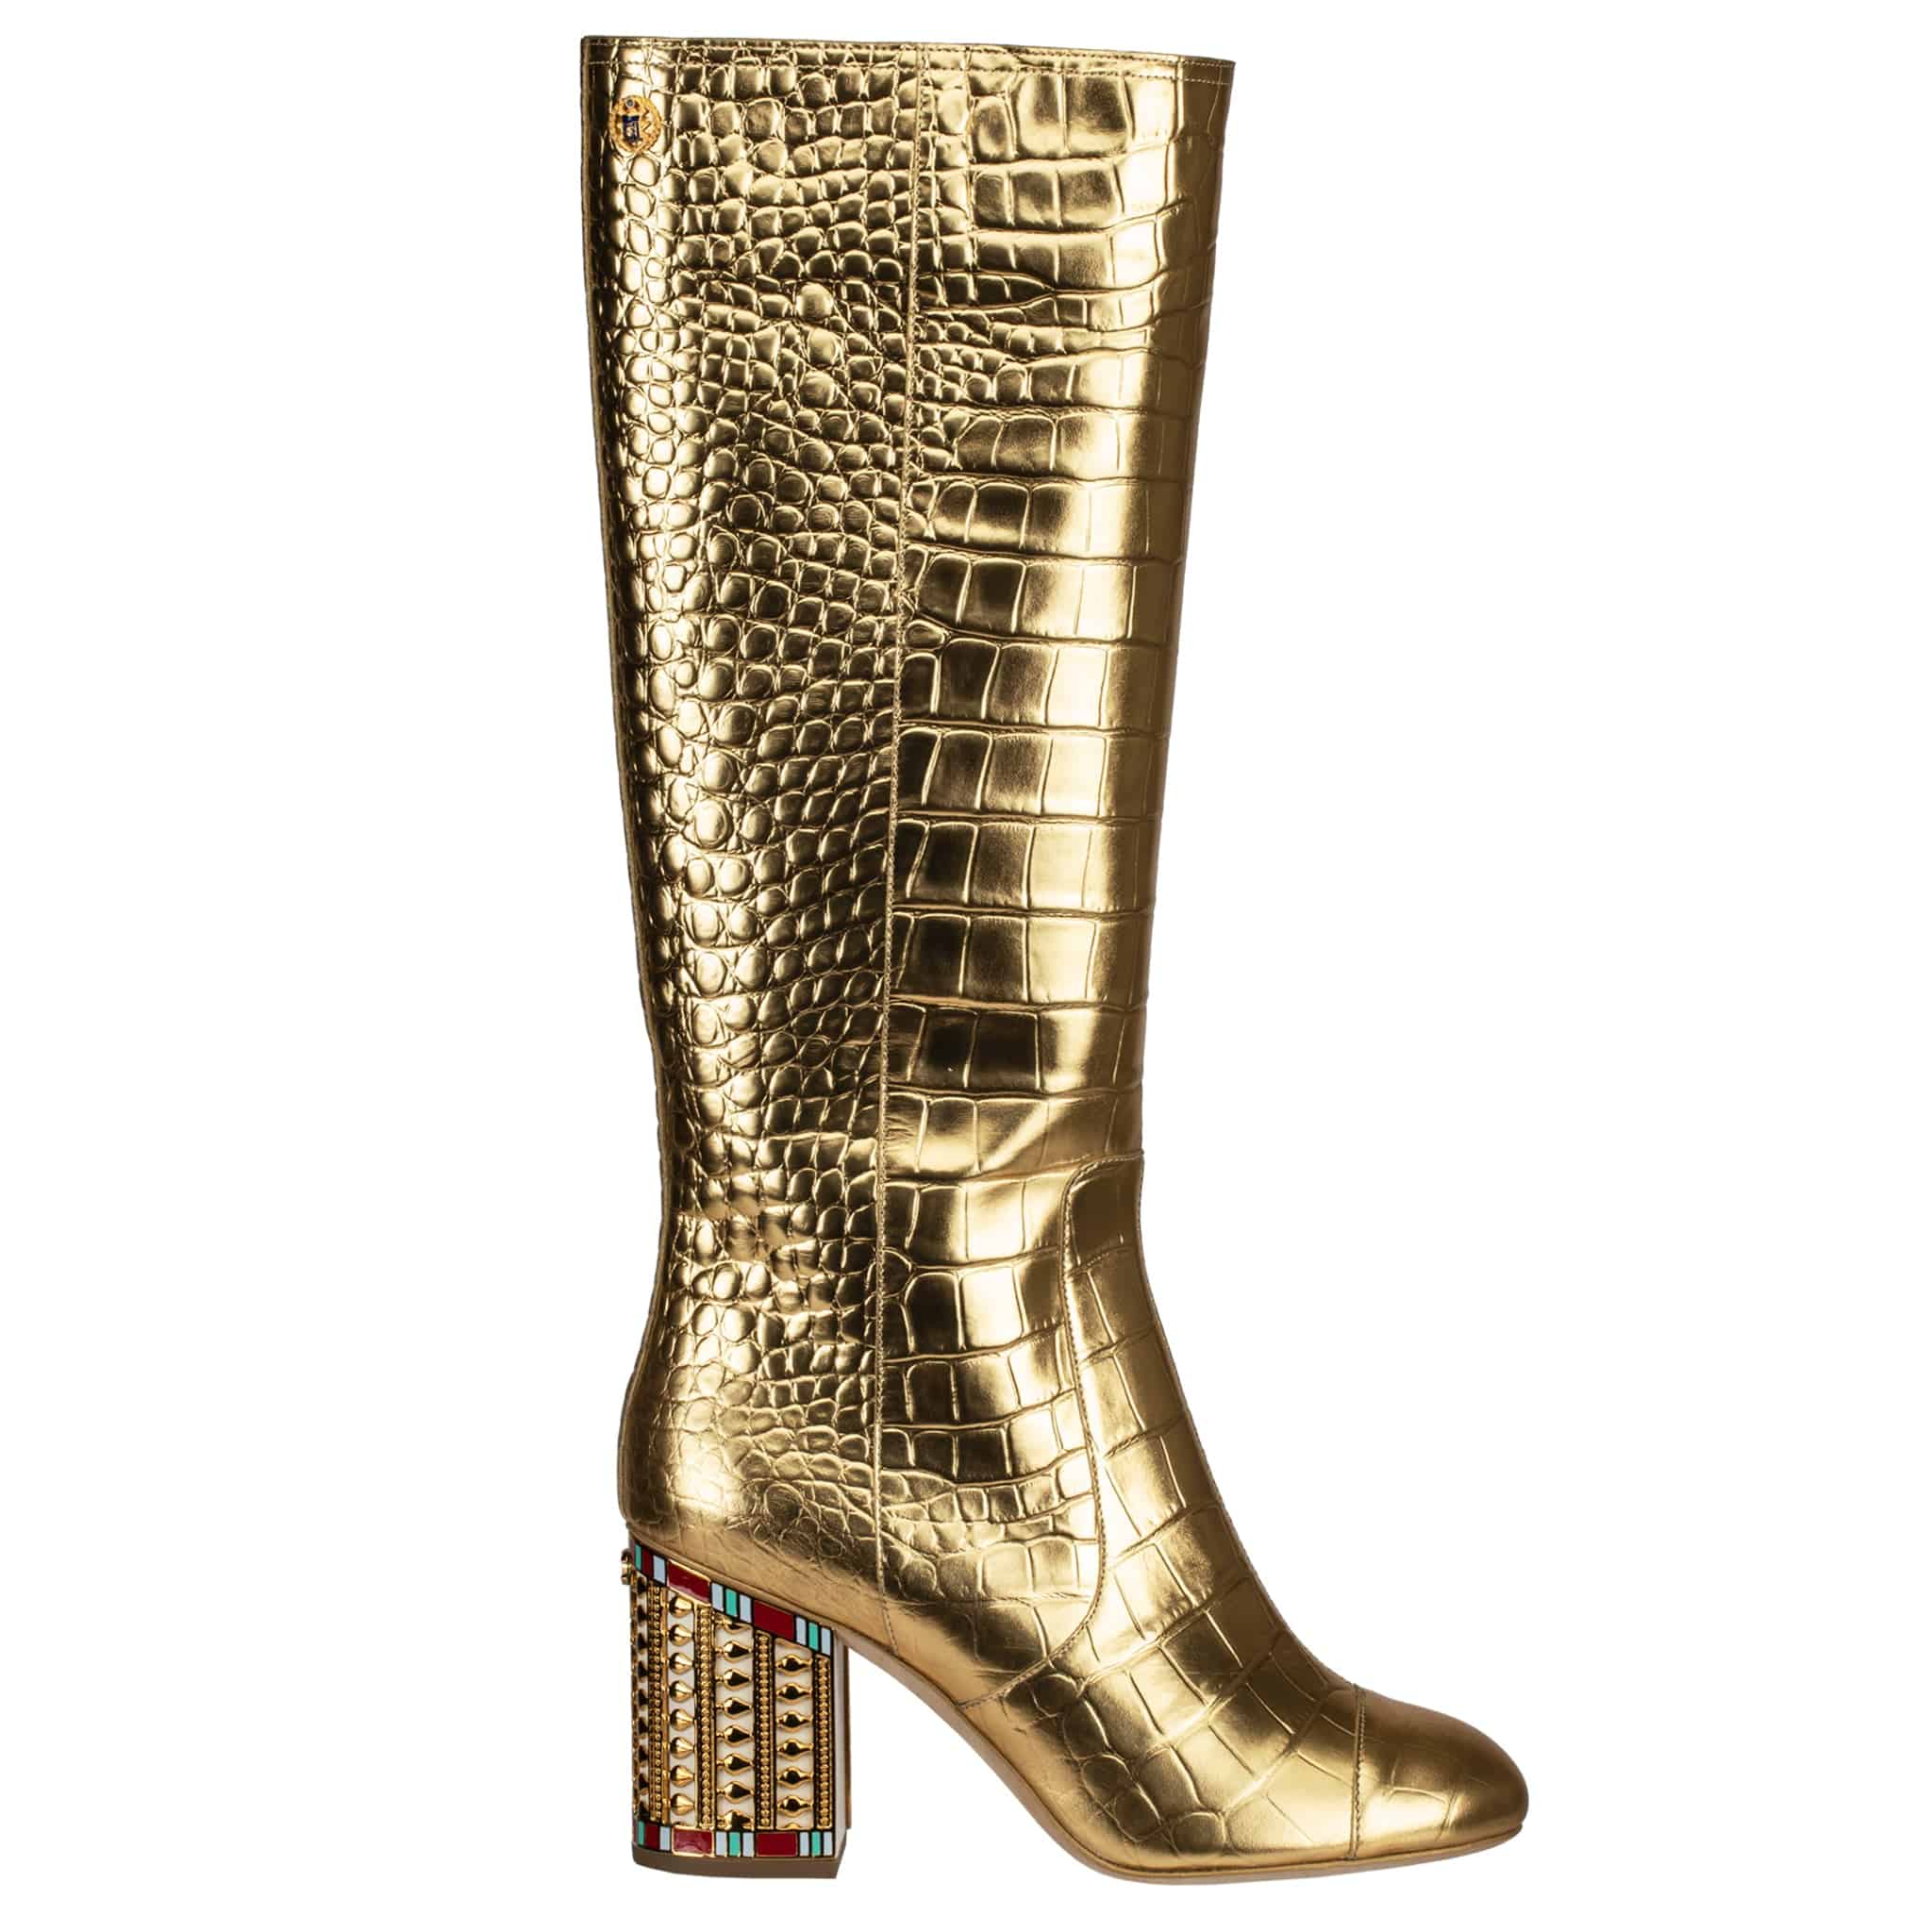 CHANEL PHARAOH TREASURE METALLIC GOLD CROCODILE EMBOSSED LEATHER HIGH BOOTS 39 FR - On Repeat